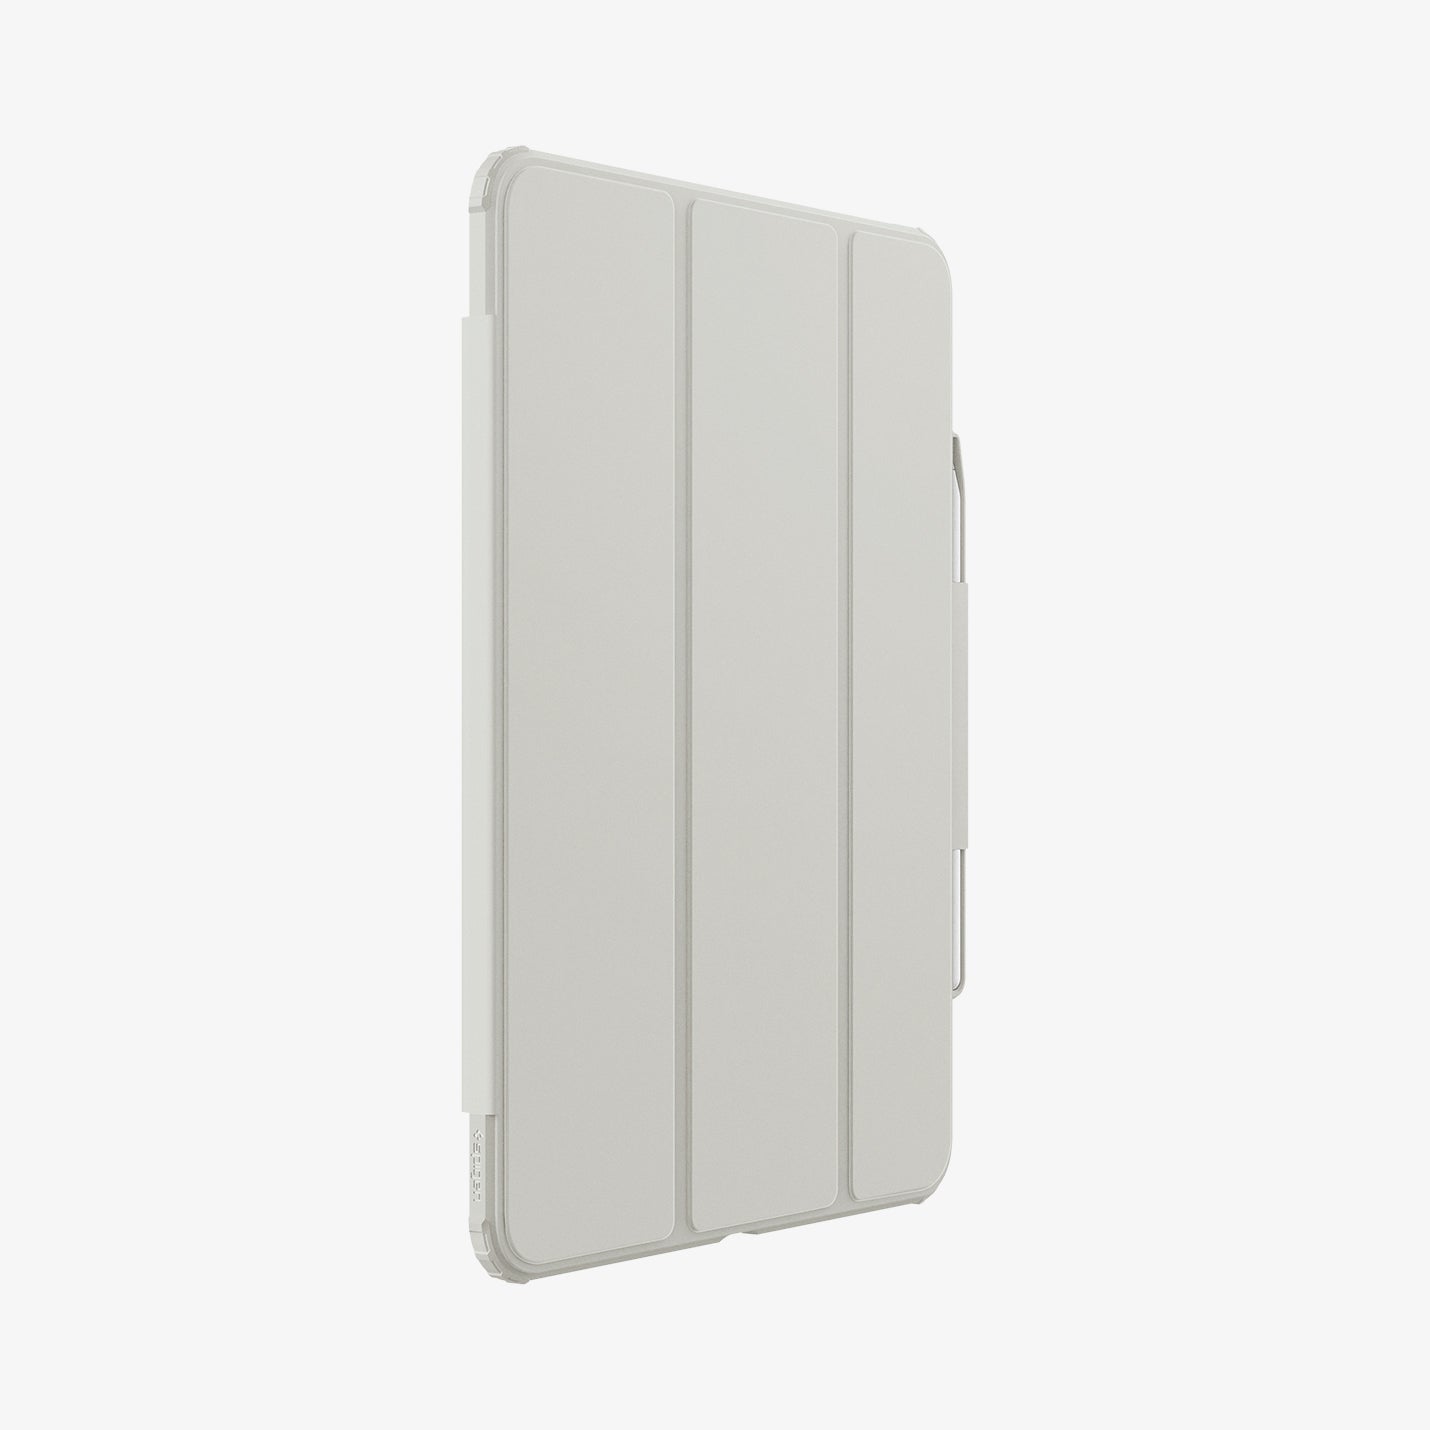 ACS07014 - iPad Pro 12.9-inch Case Air Skin Pro in Gray showing the side and front